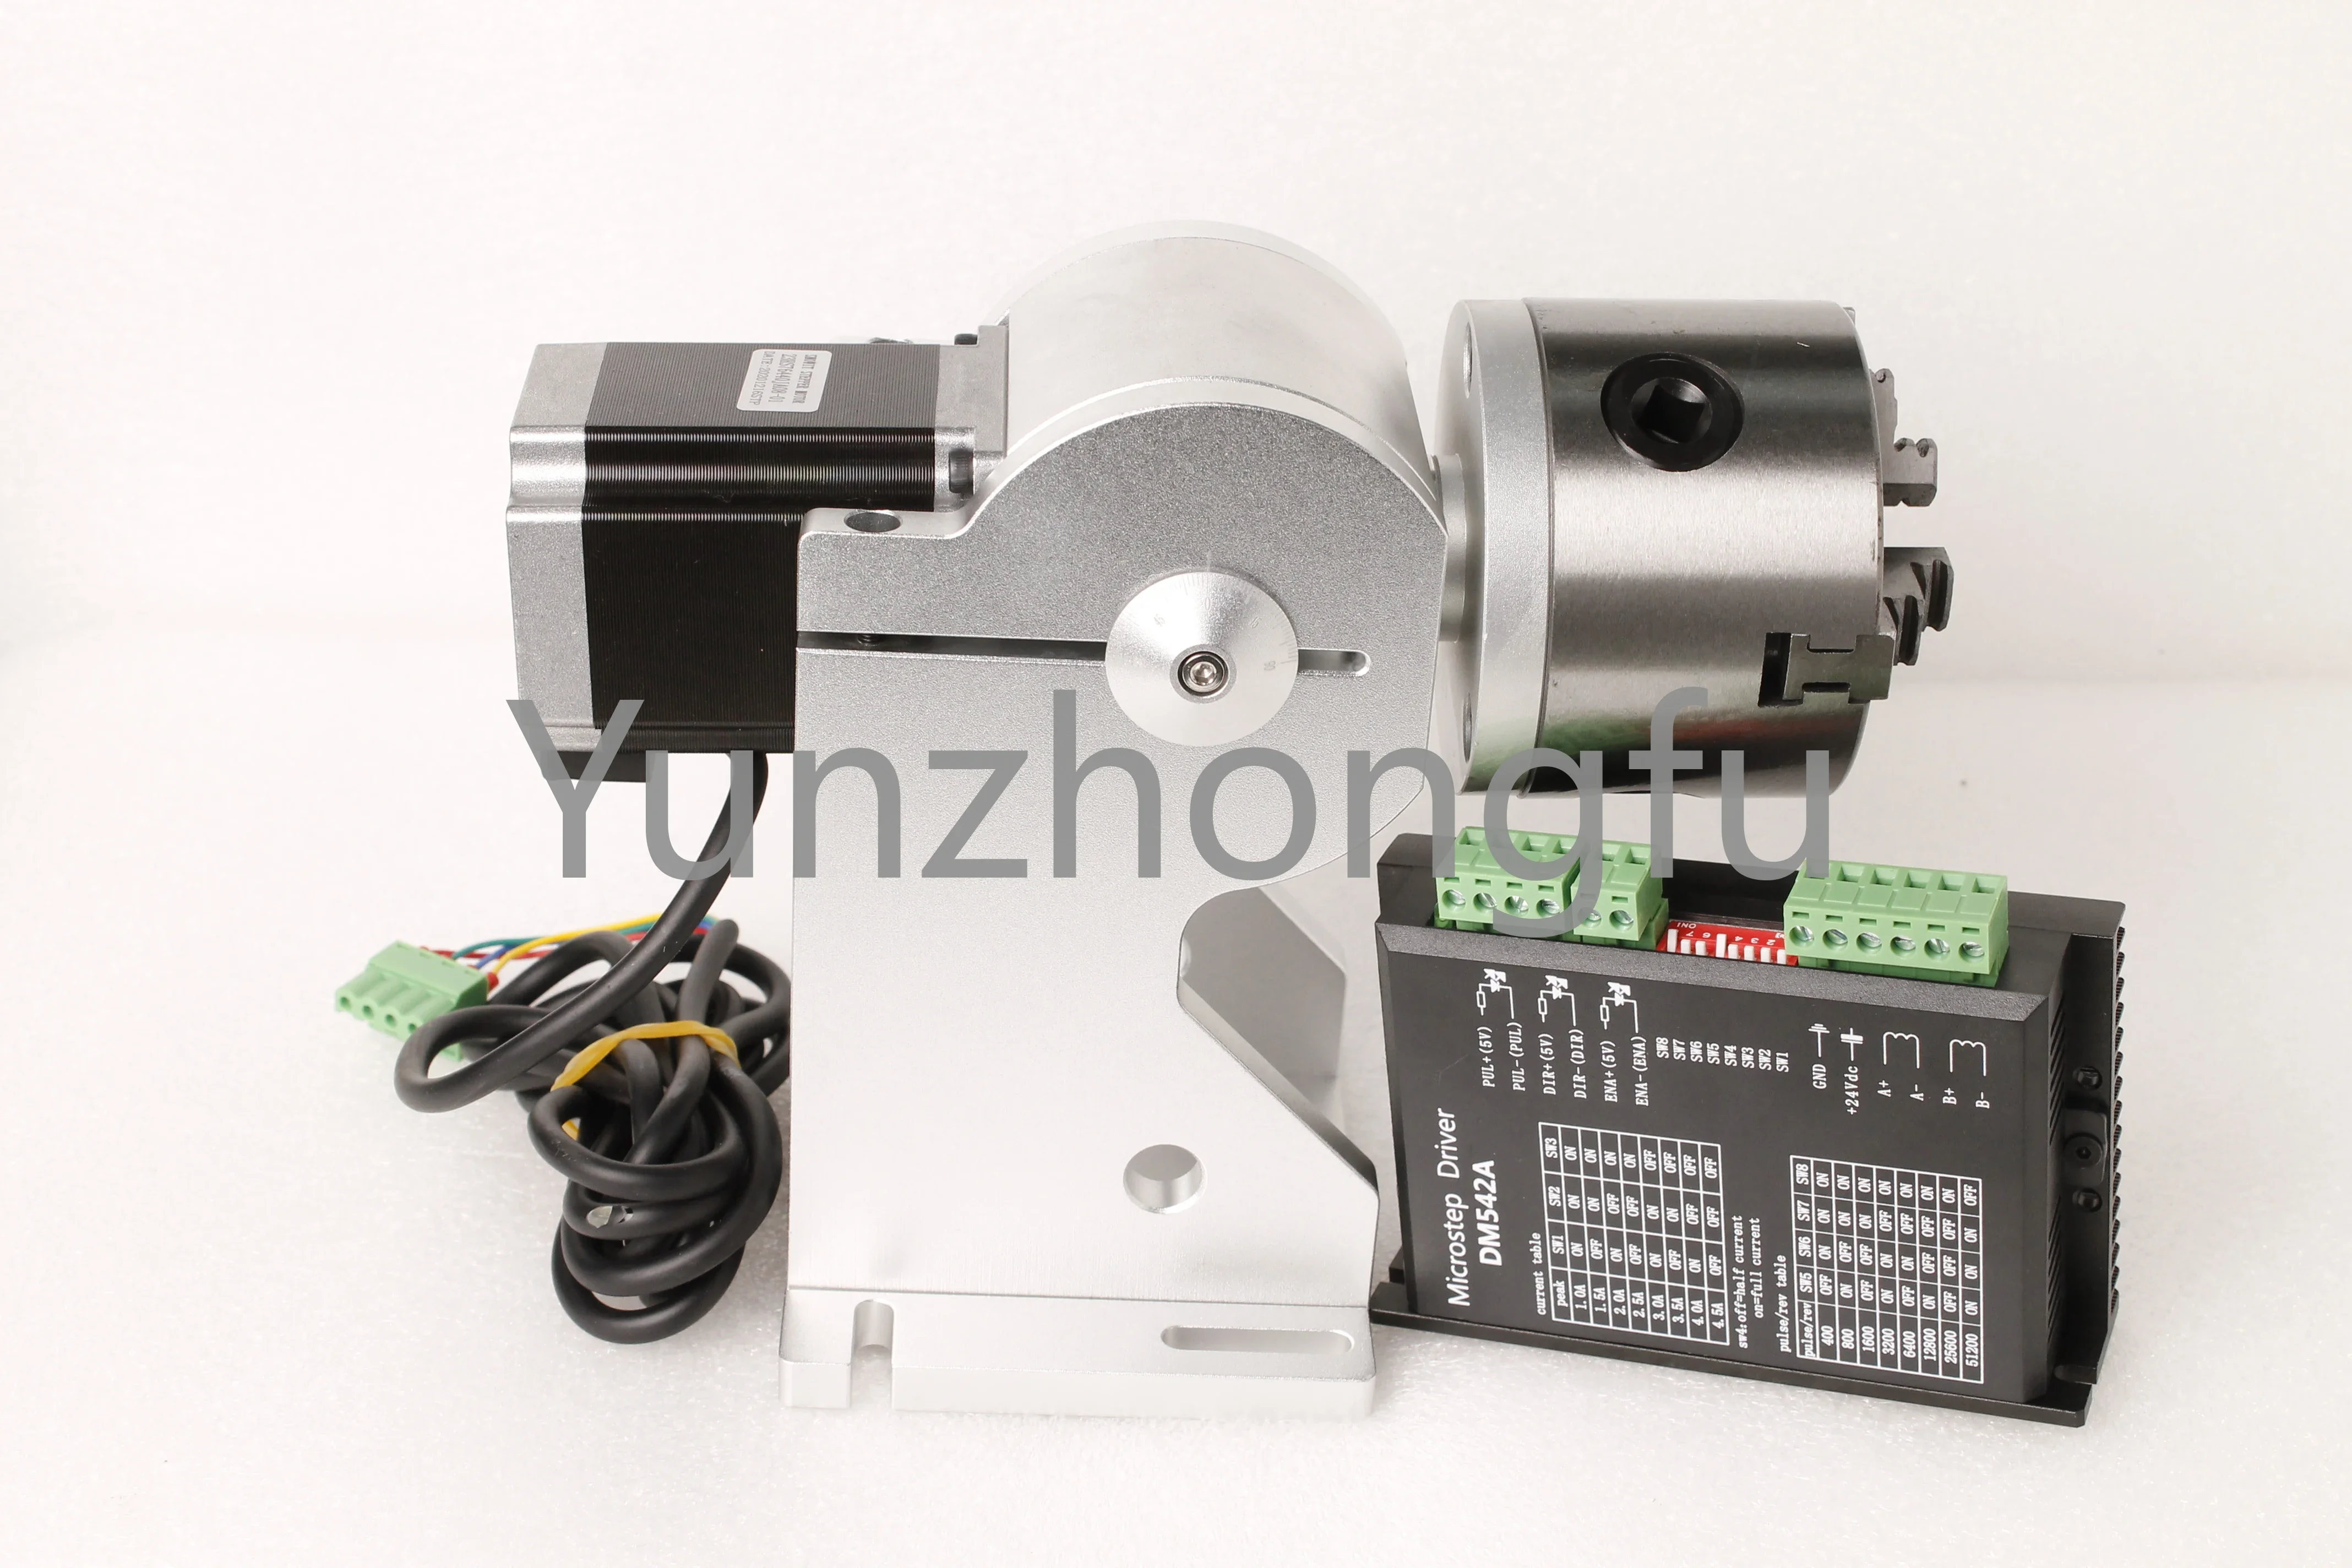 

Laser equipment marking machine spare parts Rotary chuck Rotary Device head axis D80 suport diameter 2 -75 mm